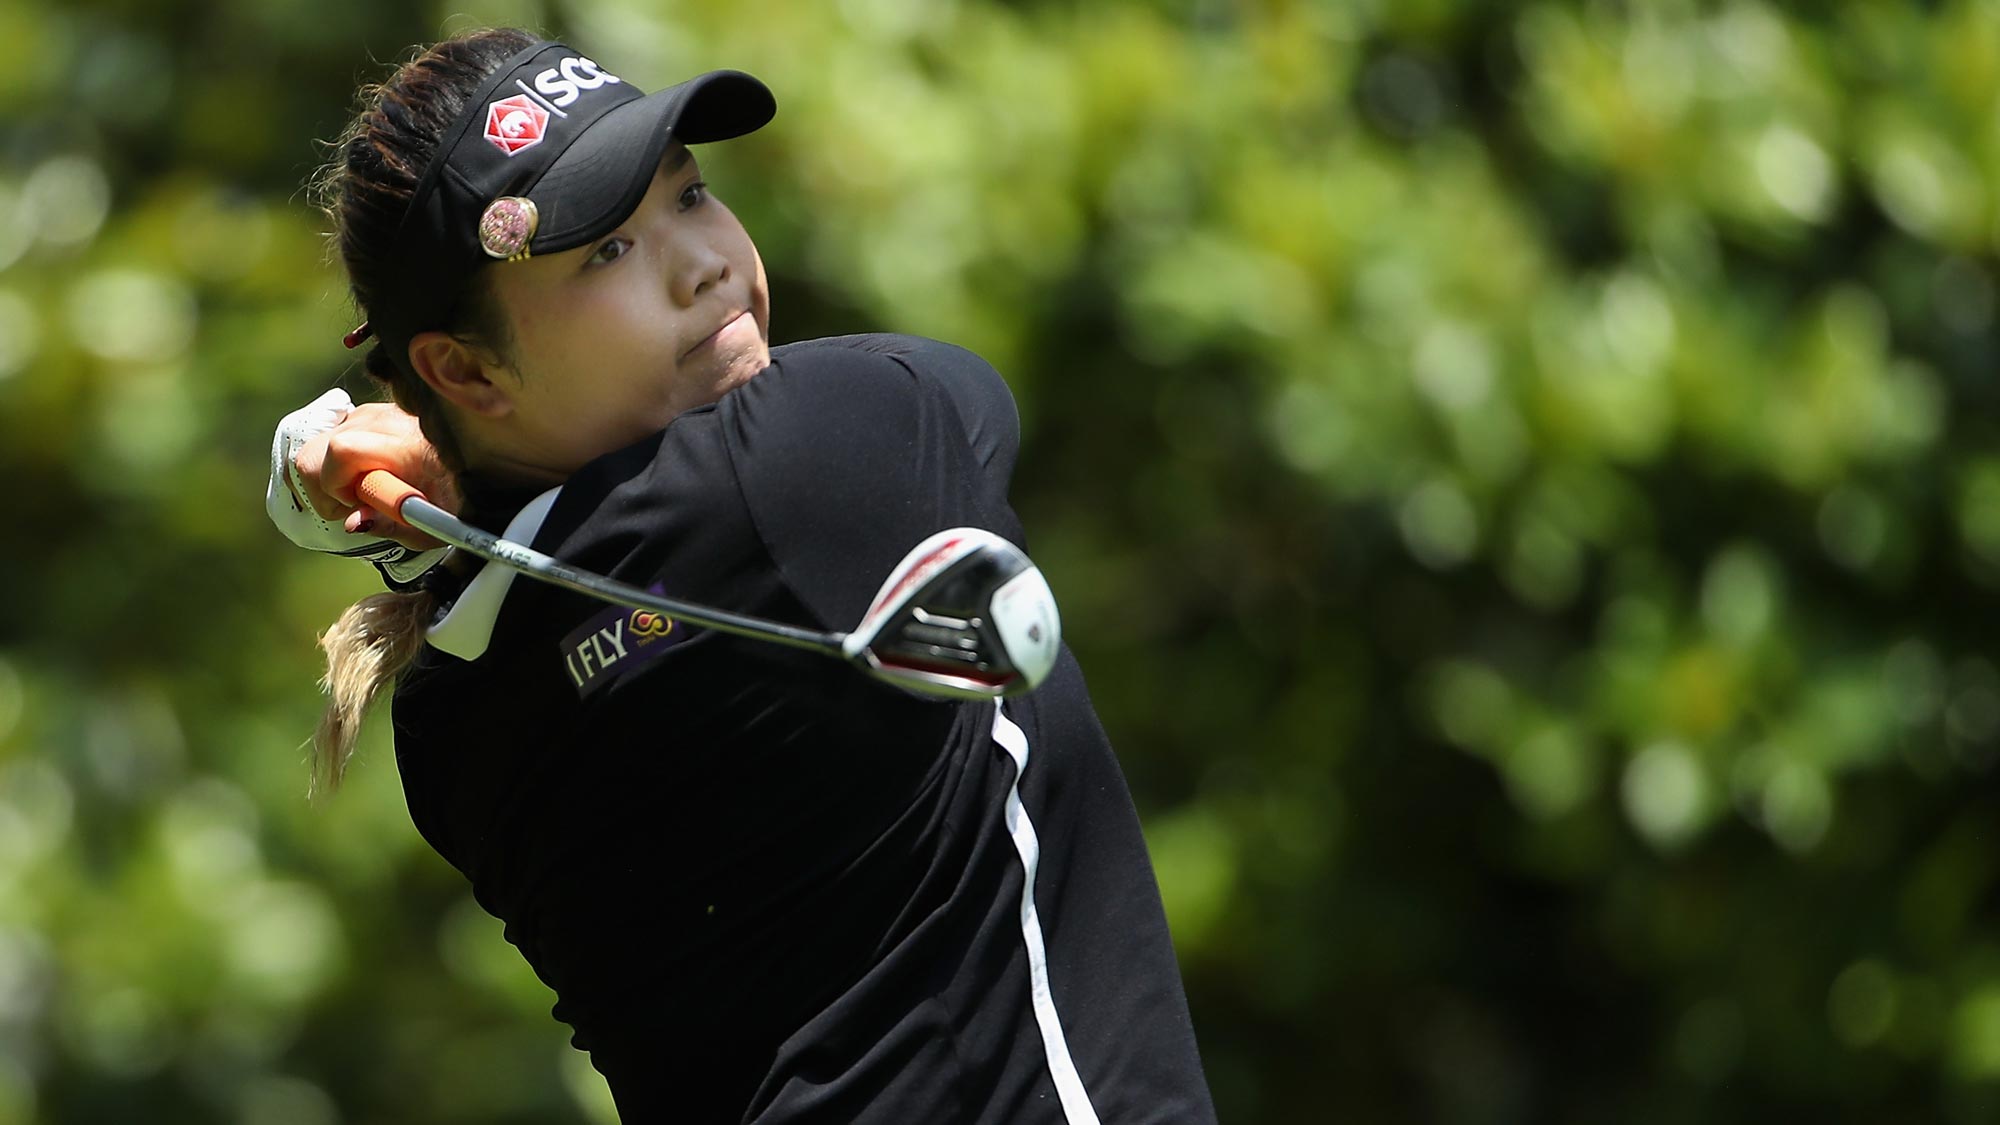 Ariya Jutanugarn of Thailand plays a tee shot on the third hole during the final round of the 2018 U.S. Women's Open